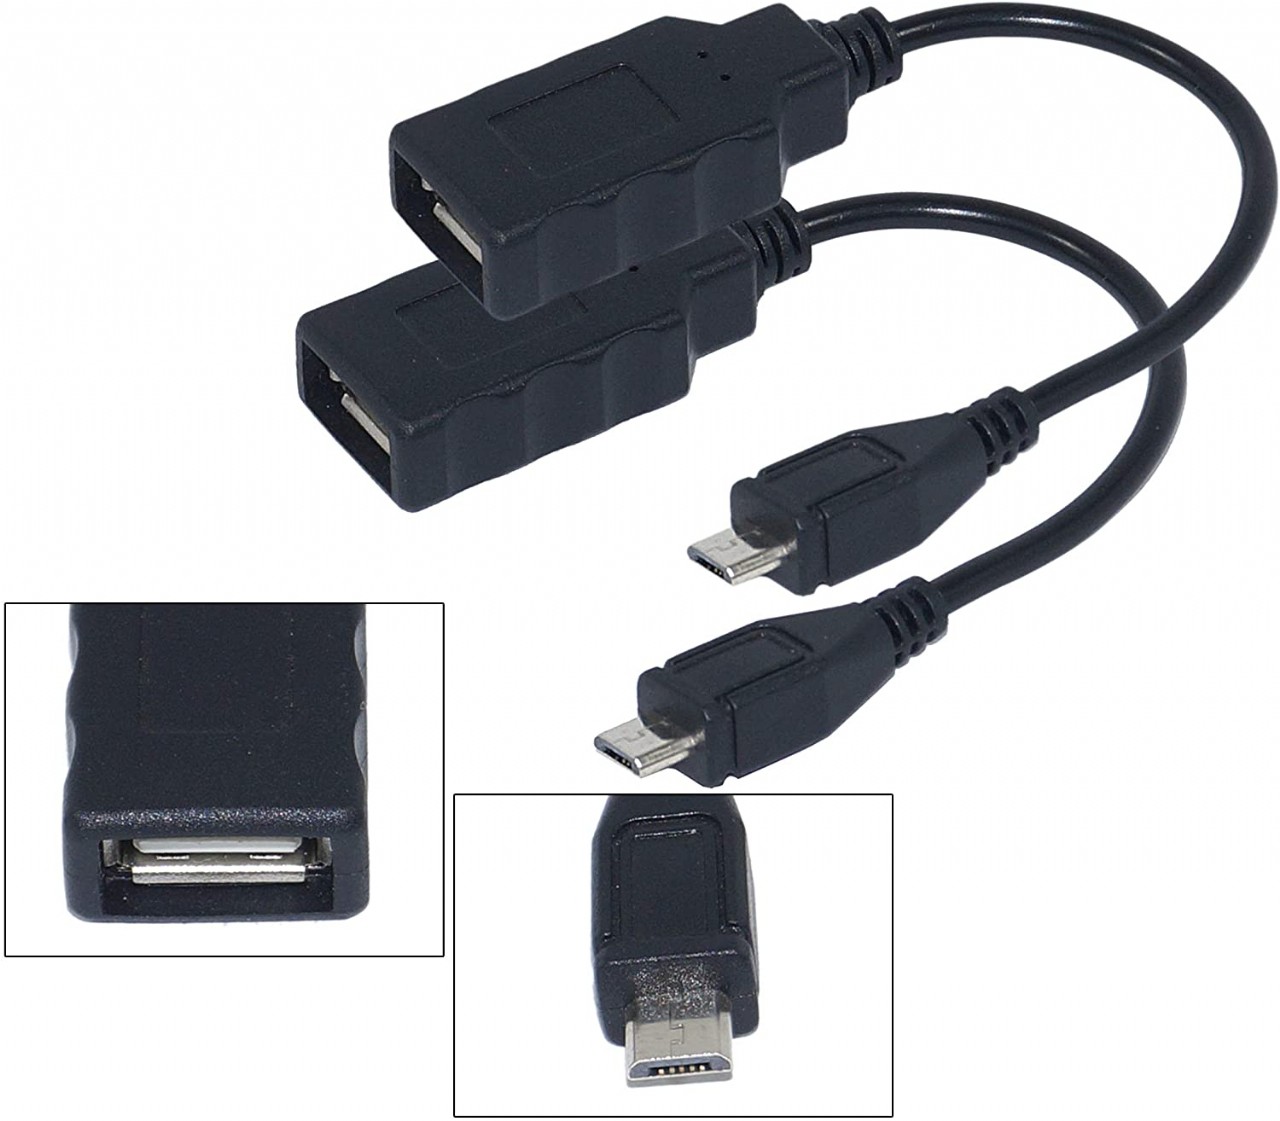 Micro USB 2.0 OTG Cable for Mobile Phones - USB A Female to Micro USB B 5 Pin Male Adapter Cable